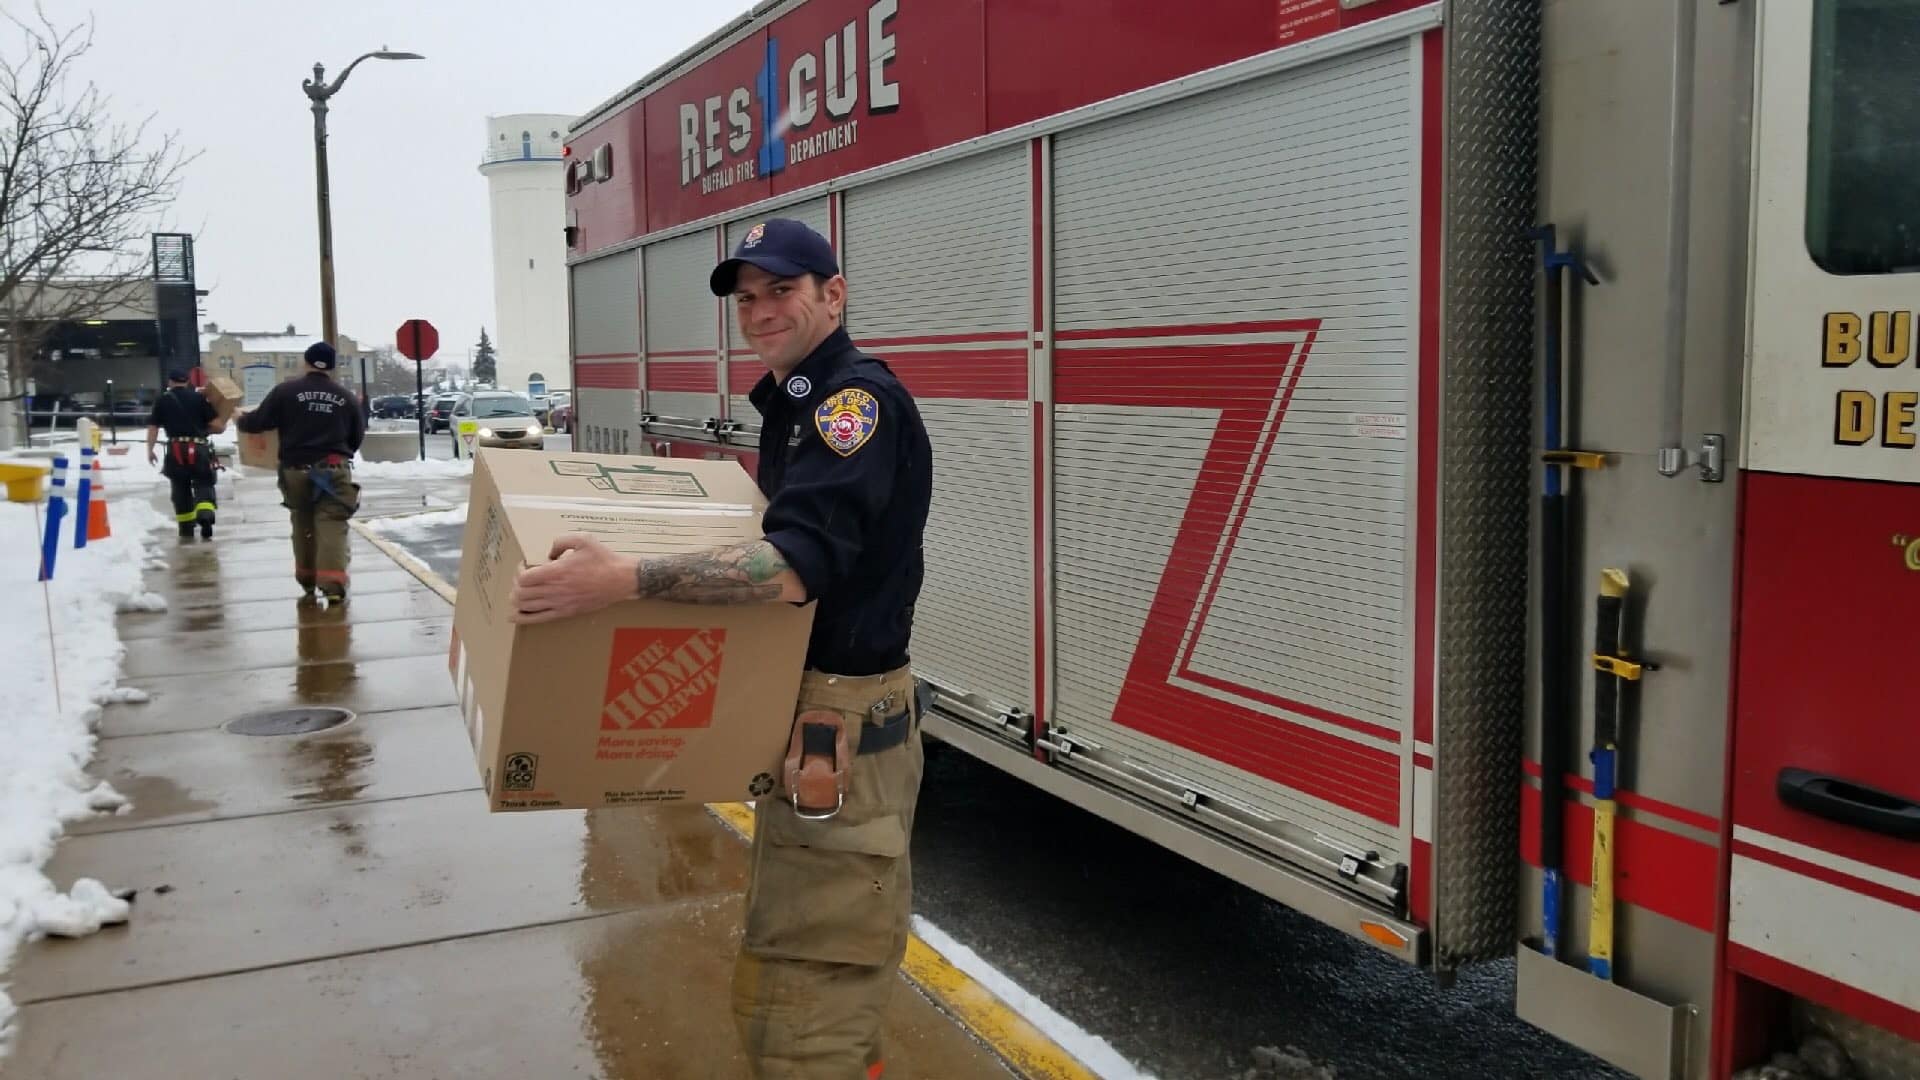 Heroes helping heroes: Buffalo Firefighters bring cases of popcorn to veterans at the VA